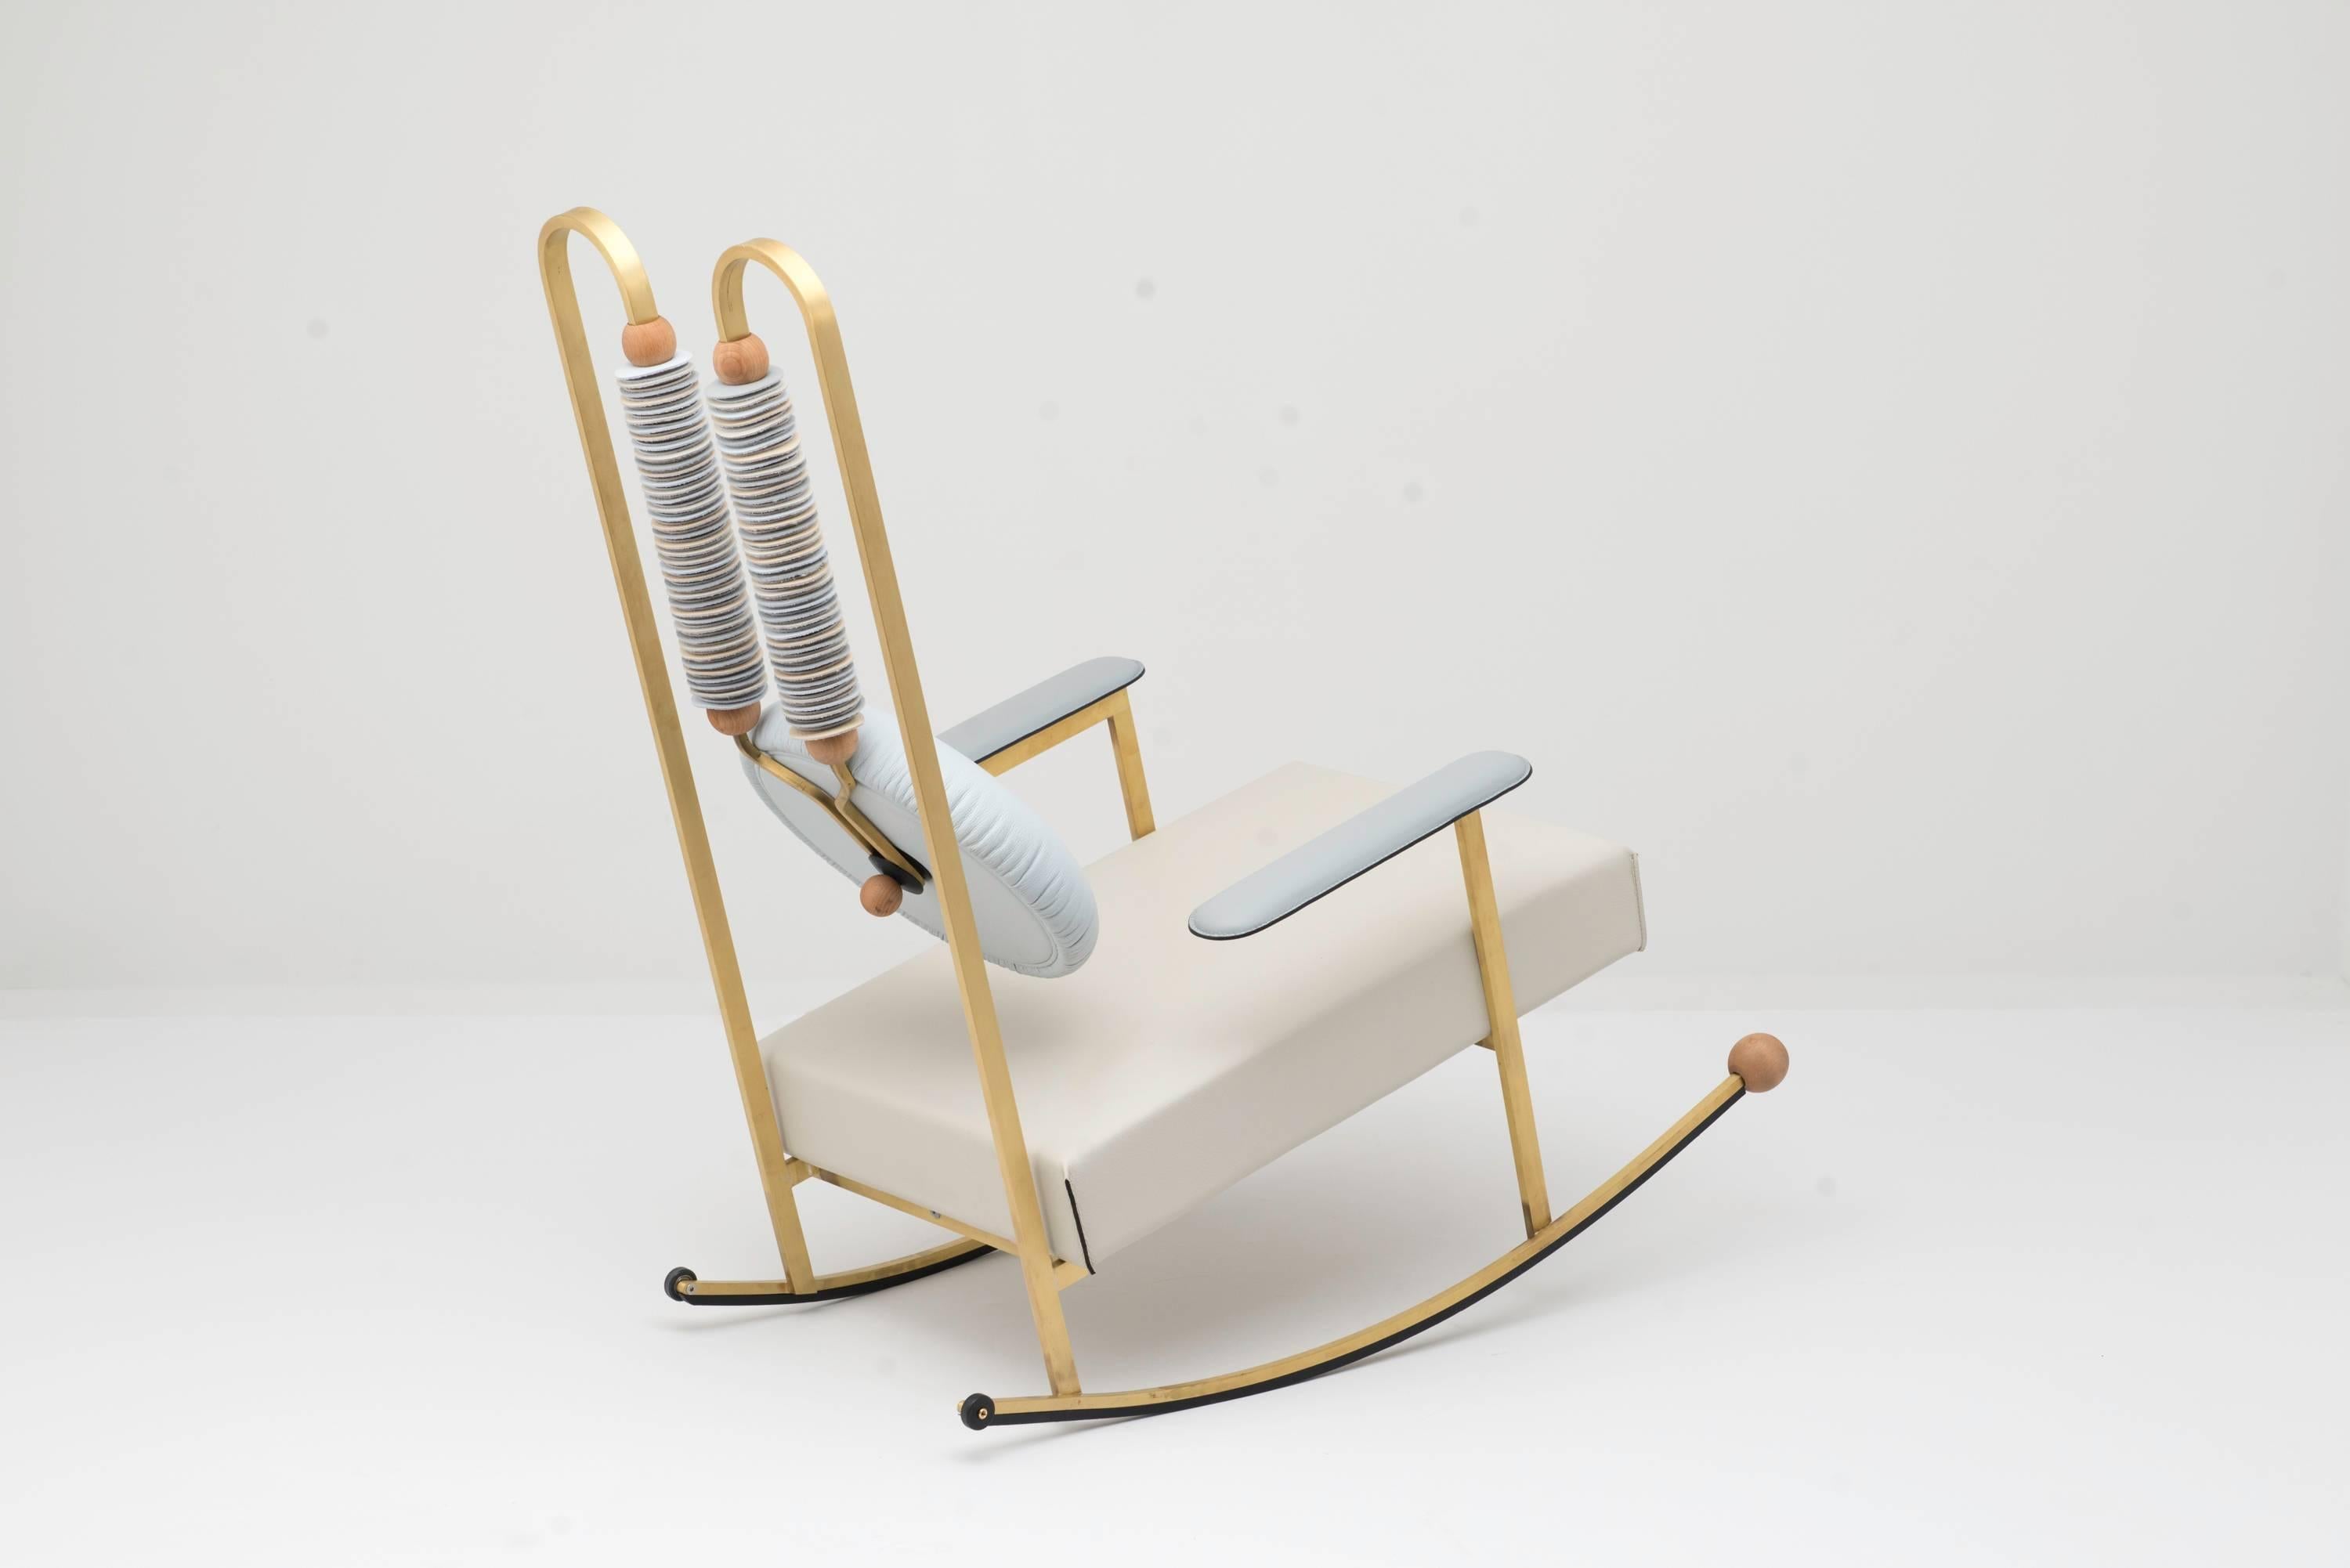 Hand-Crafted Rulla Leather & Brass Rocking Chair by Mario Milana Handcrafted in Italy For Sale